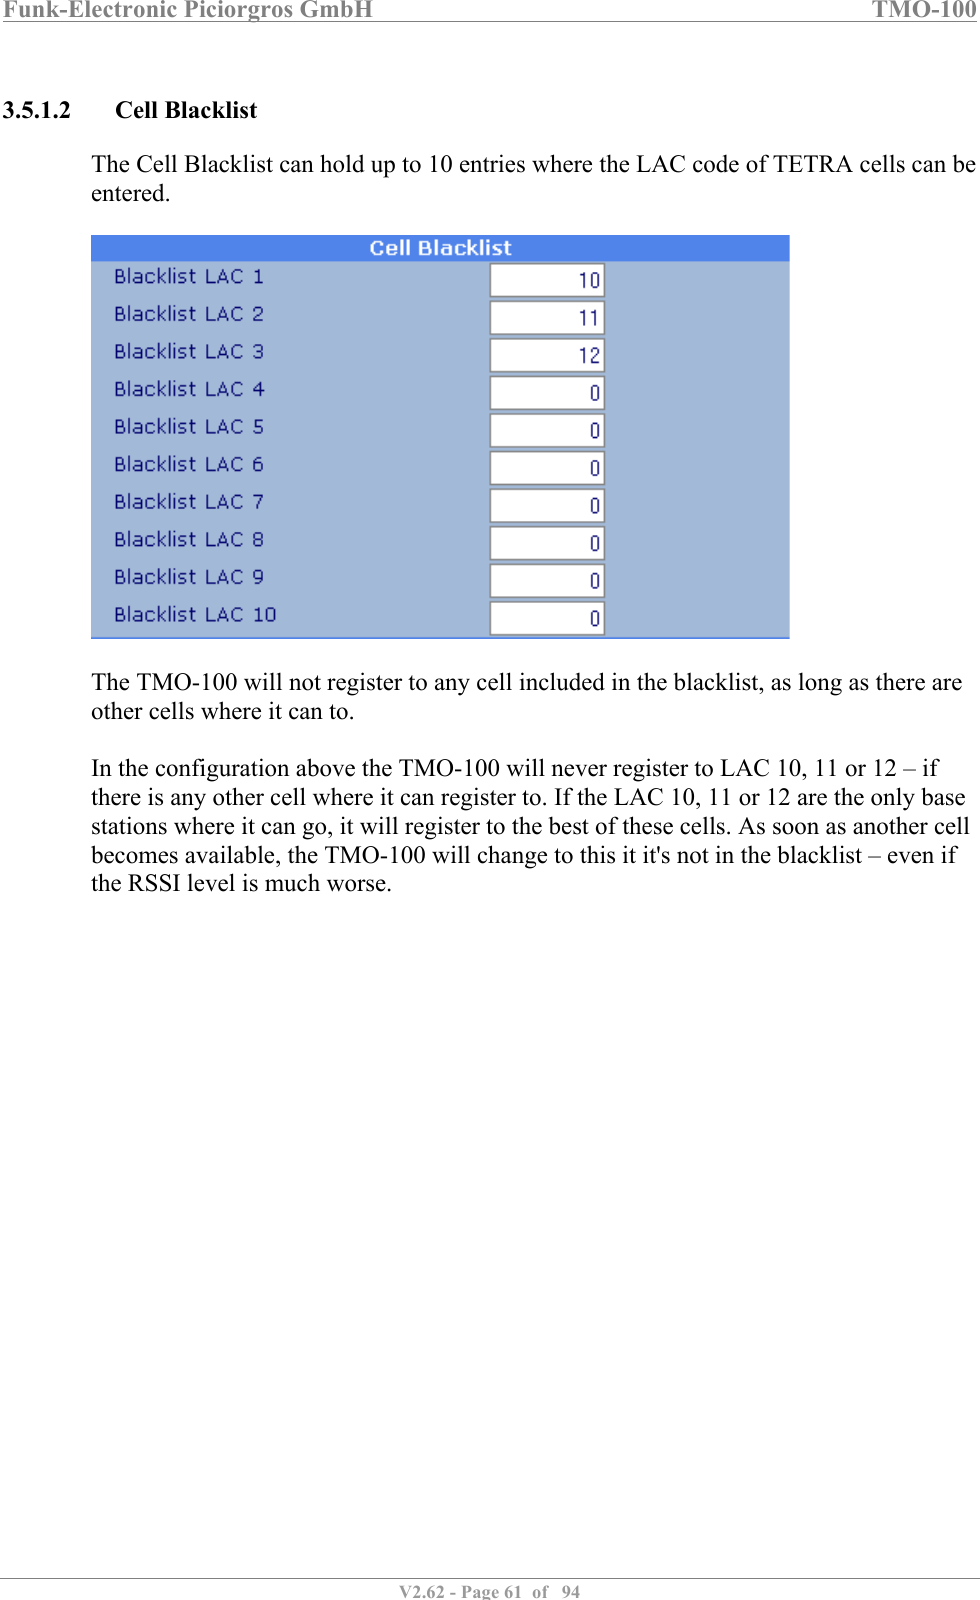 Funk-Electronic Piciorgros GmbH   TMO-100   V2.62 - Page 61  of   94   3.5.1.2 Cell Blacklist The Cell Blacklist can hold up to 10 entries where the LAC code of TETRA cells can be entered.    The TMO-100 will not register to any cell included in the blacklist, as long as there are other cells where it can to.  In the configuration above the TMO-100 will never register to LAC 10, 11 or 12 – if there is any other cell where it can register to. If the LAC 10, 11 or 12 are the only base stations where it can go, it will register to the best of these cells. As soon as another cell becomes available, the TMO-100 will change to this it it&apos;s not in the blacklist – even if the RSSI level is much worse.  